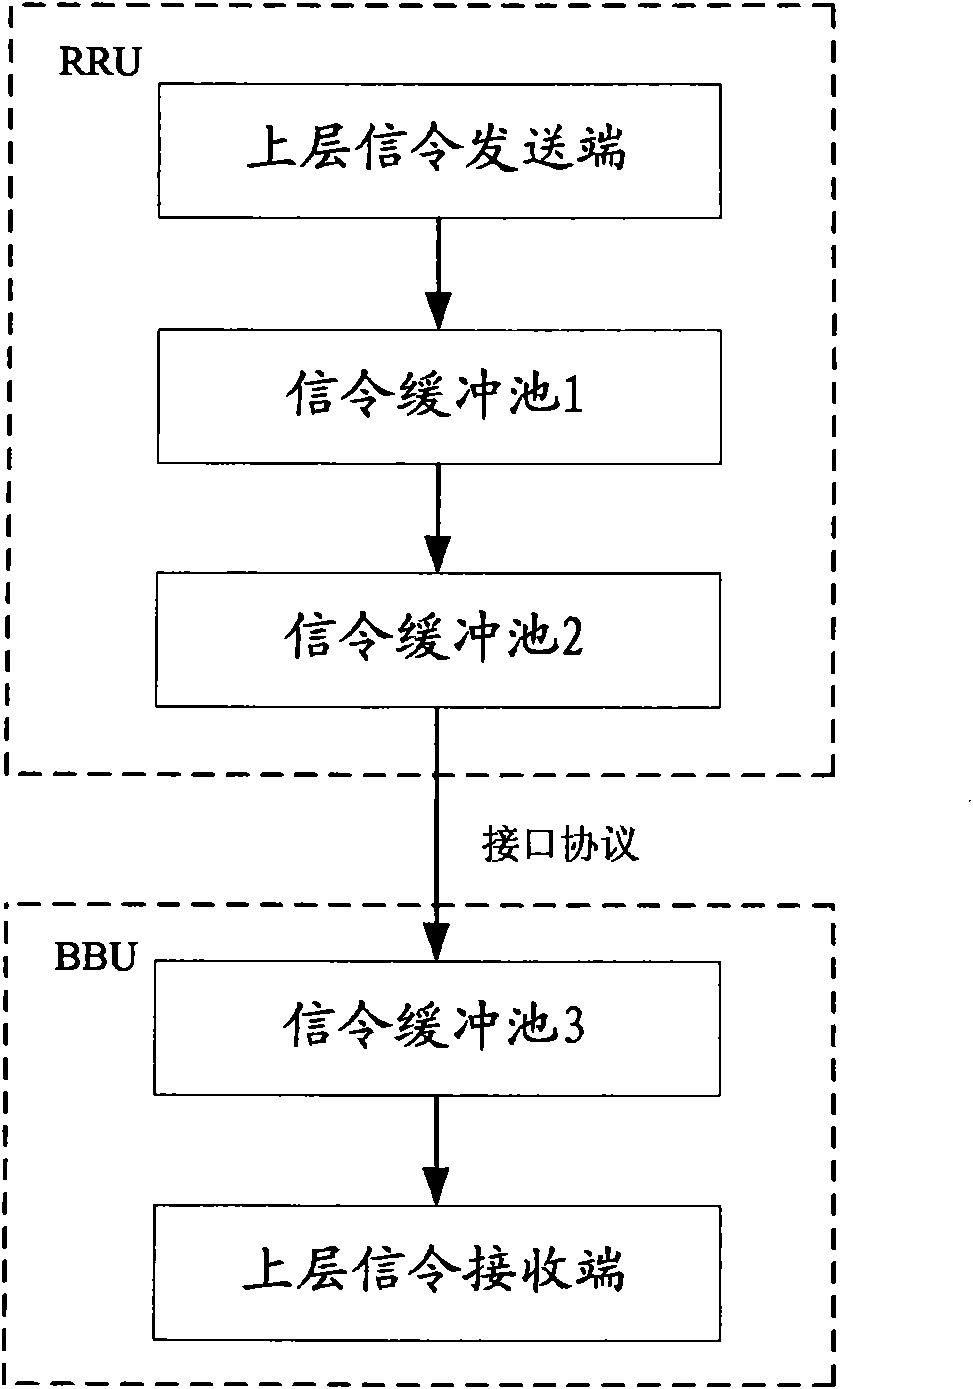 Method and device for controlling signaling traffic